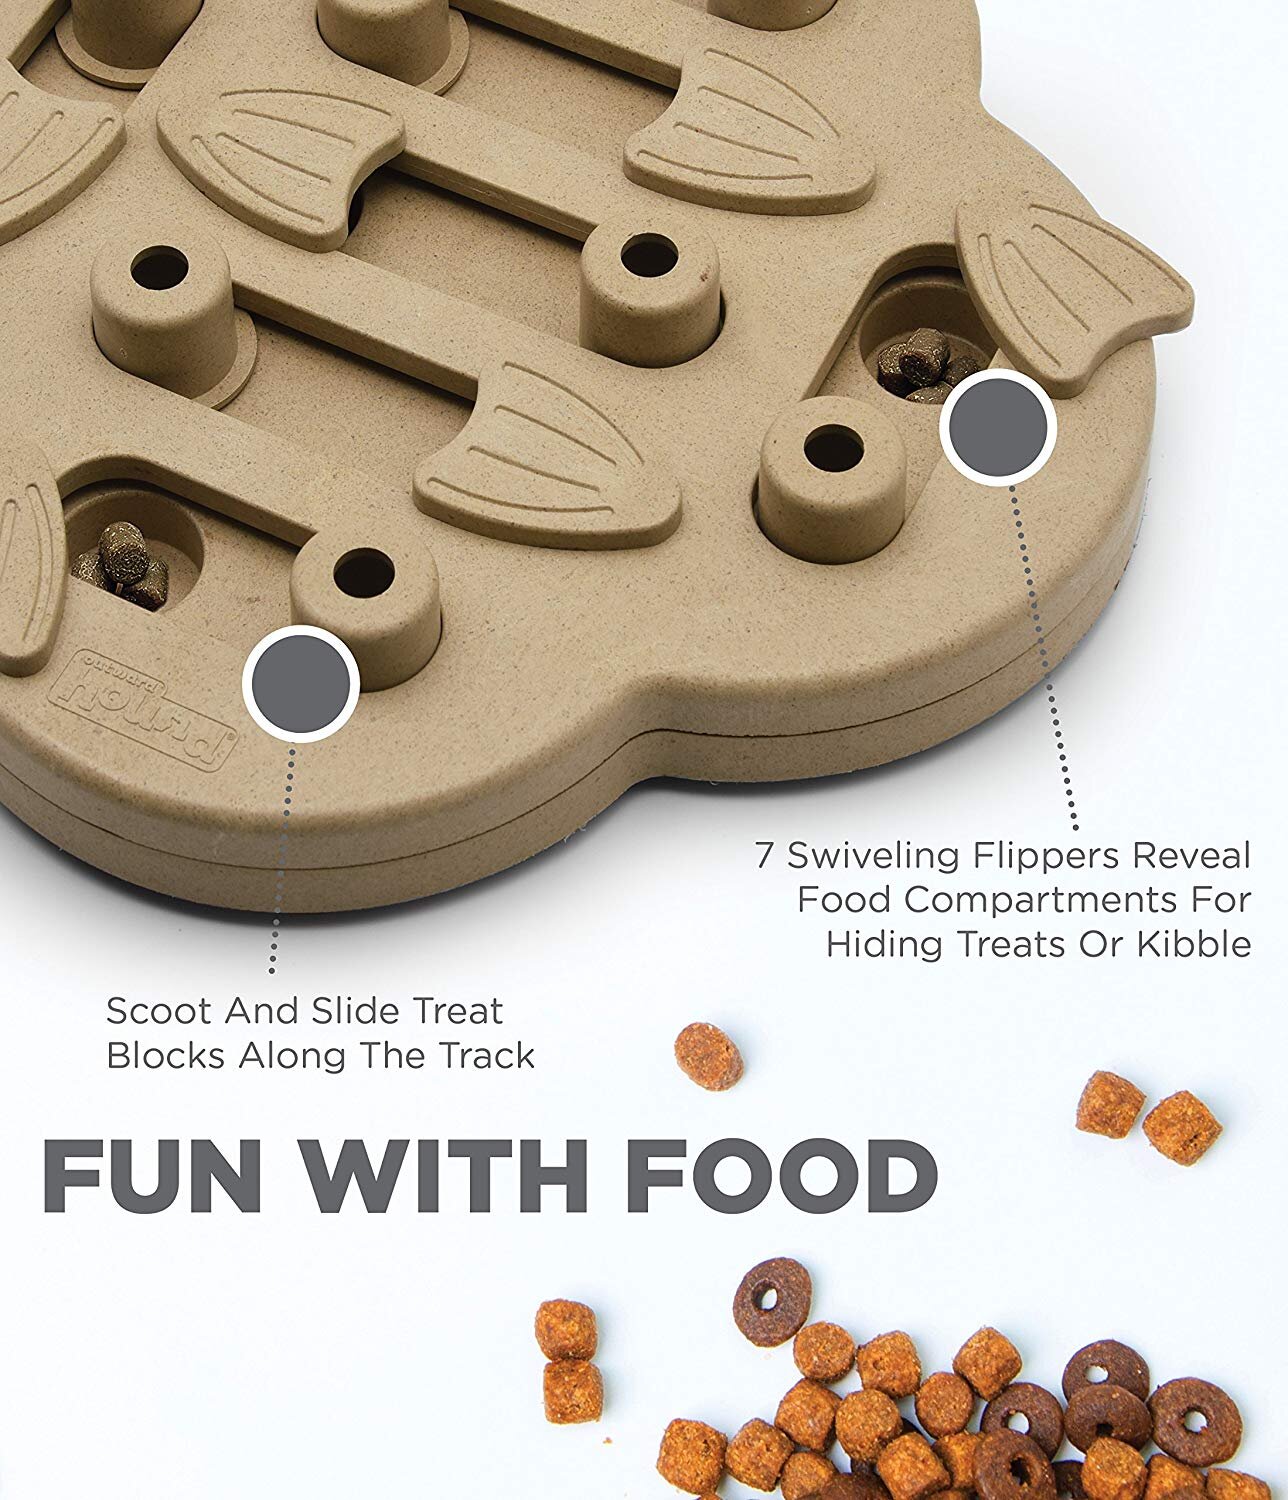 Outward Hound Nina Ottosson Puzzle Toy for Dogs - Stimulating Interactive Dog Game for Dispensing Treats